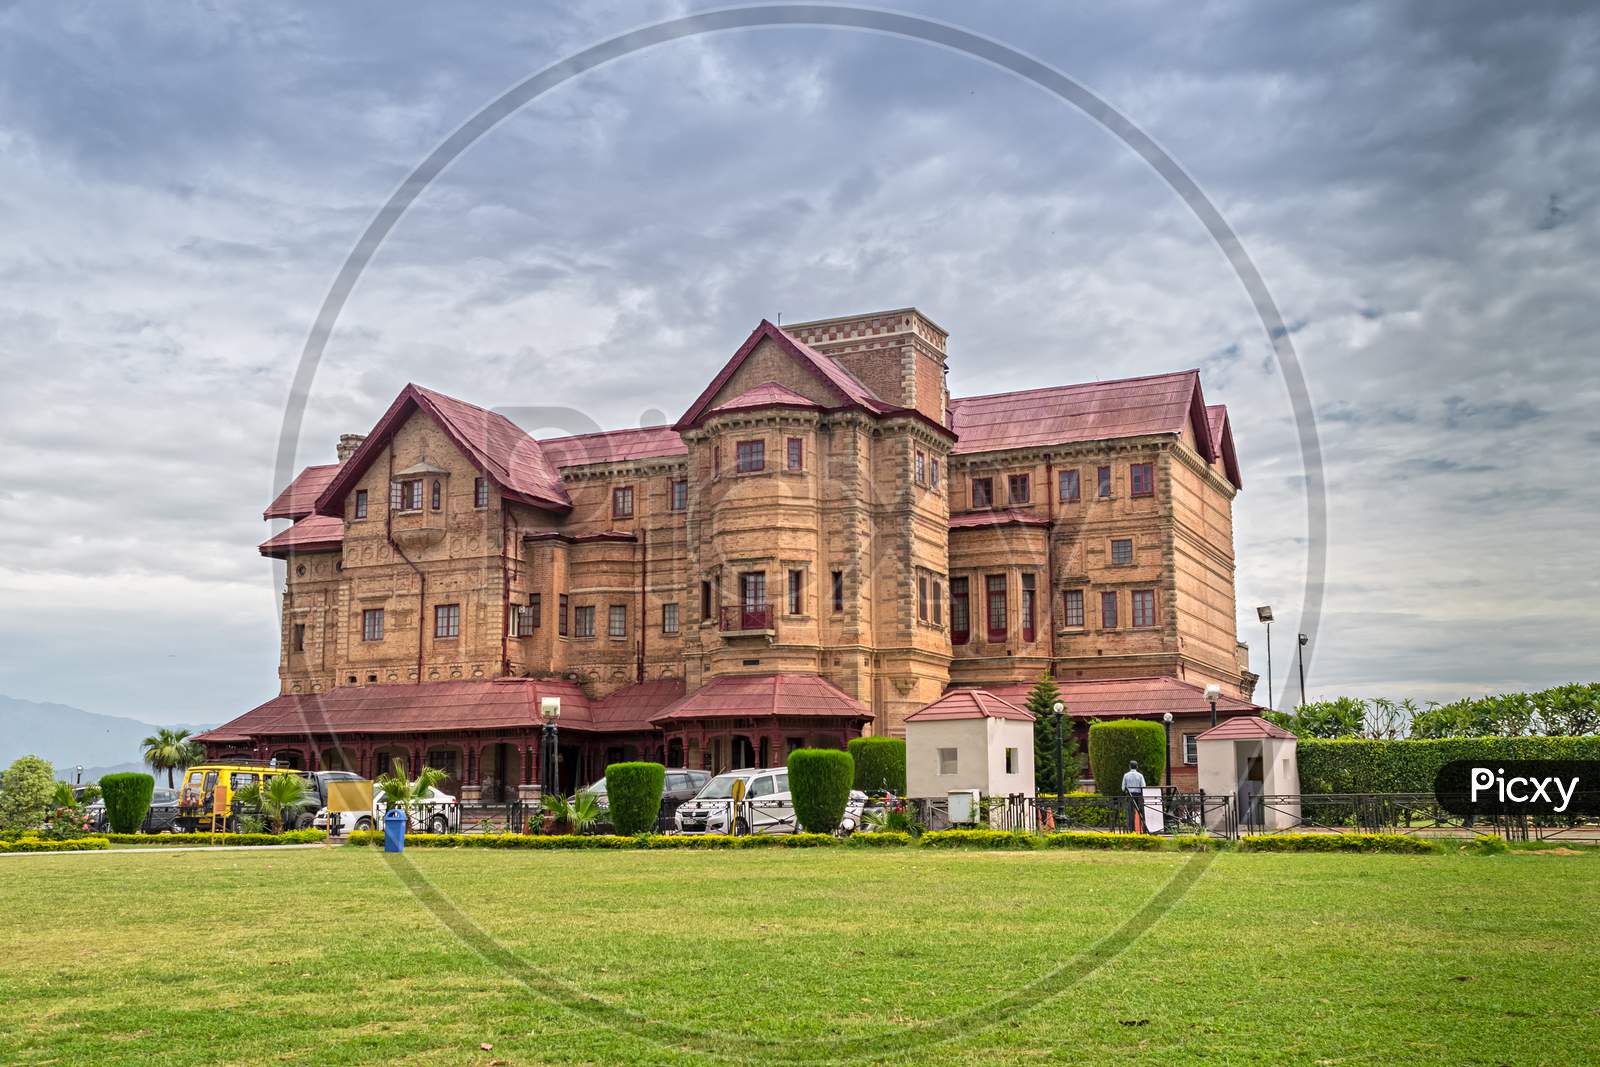 Amar Mahal Palace Is A Palace In Jammu That Was Built In The Nineteenth Century.